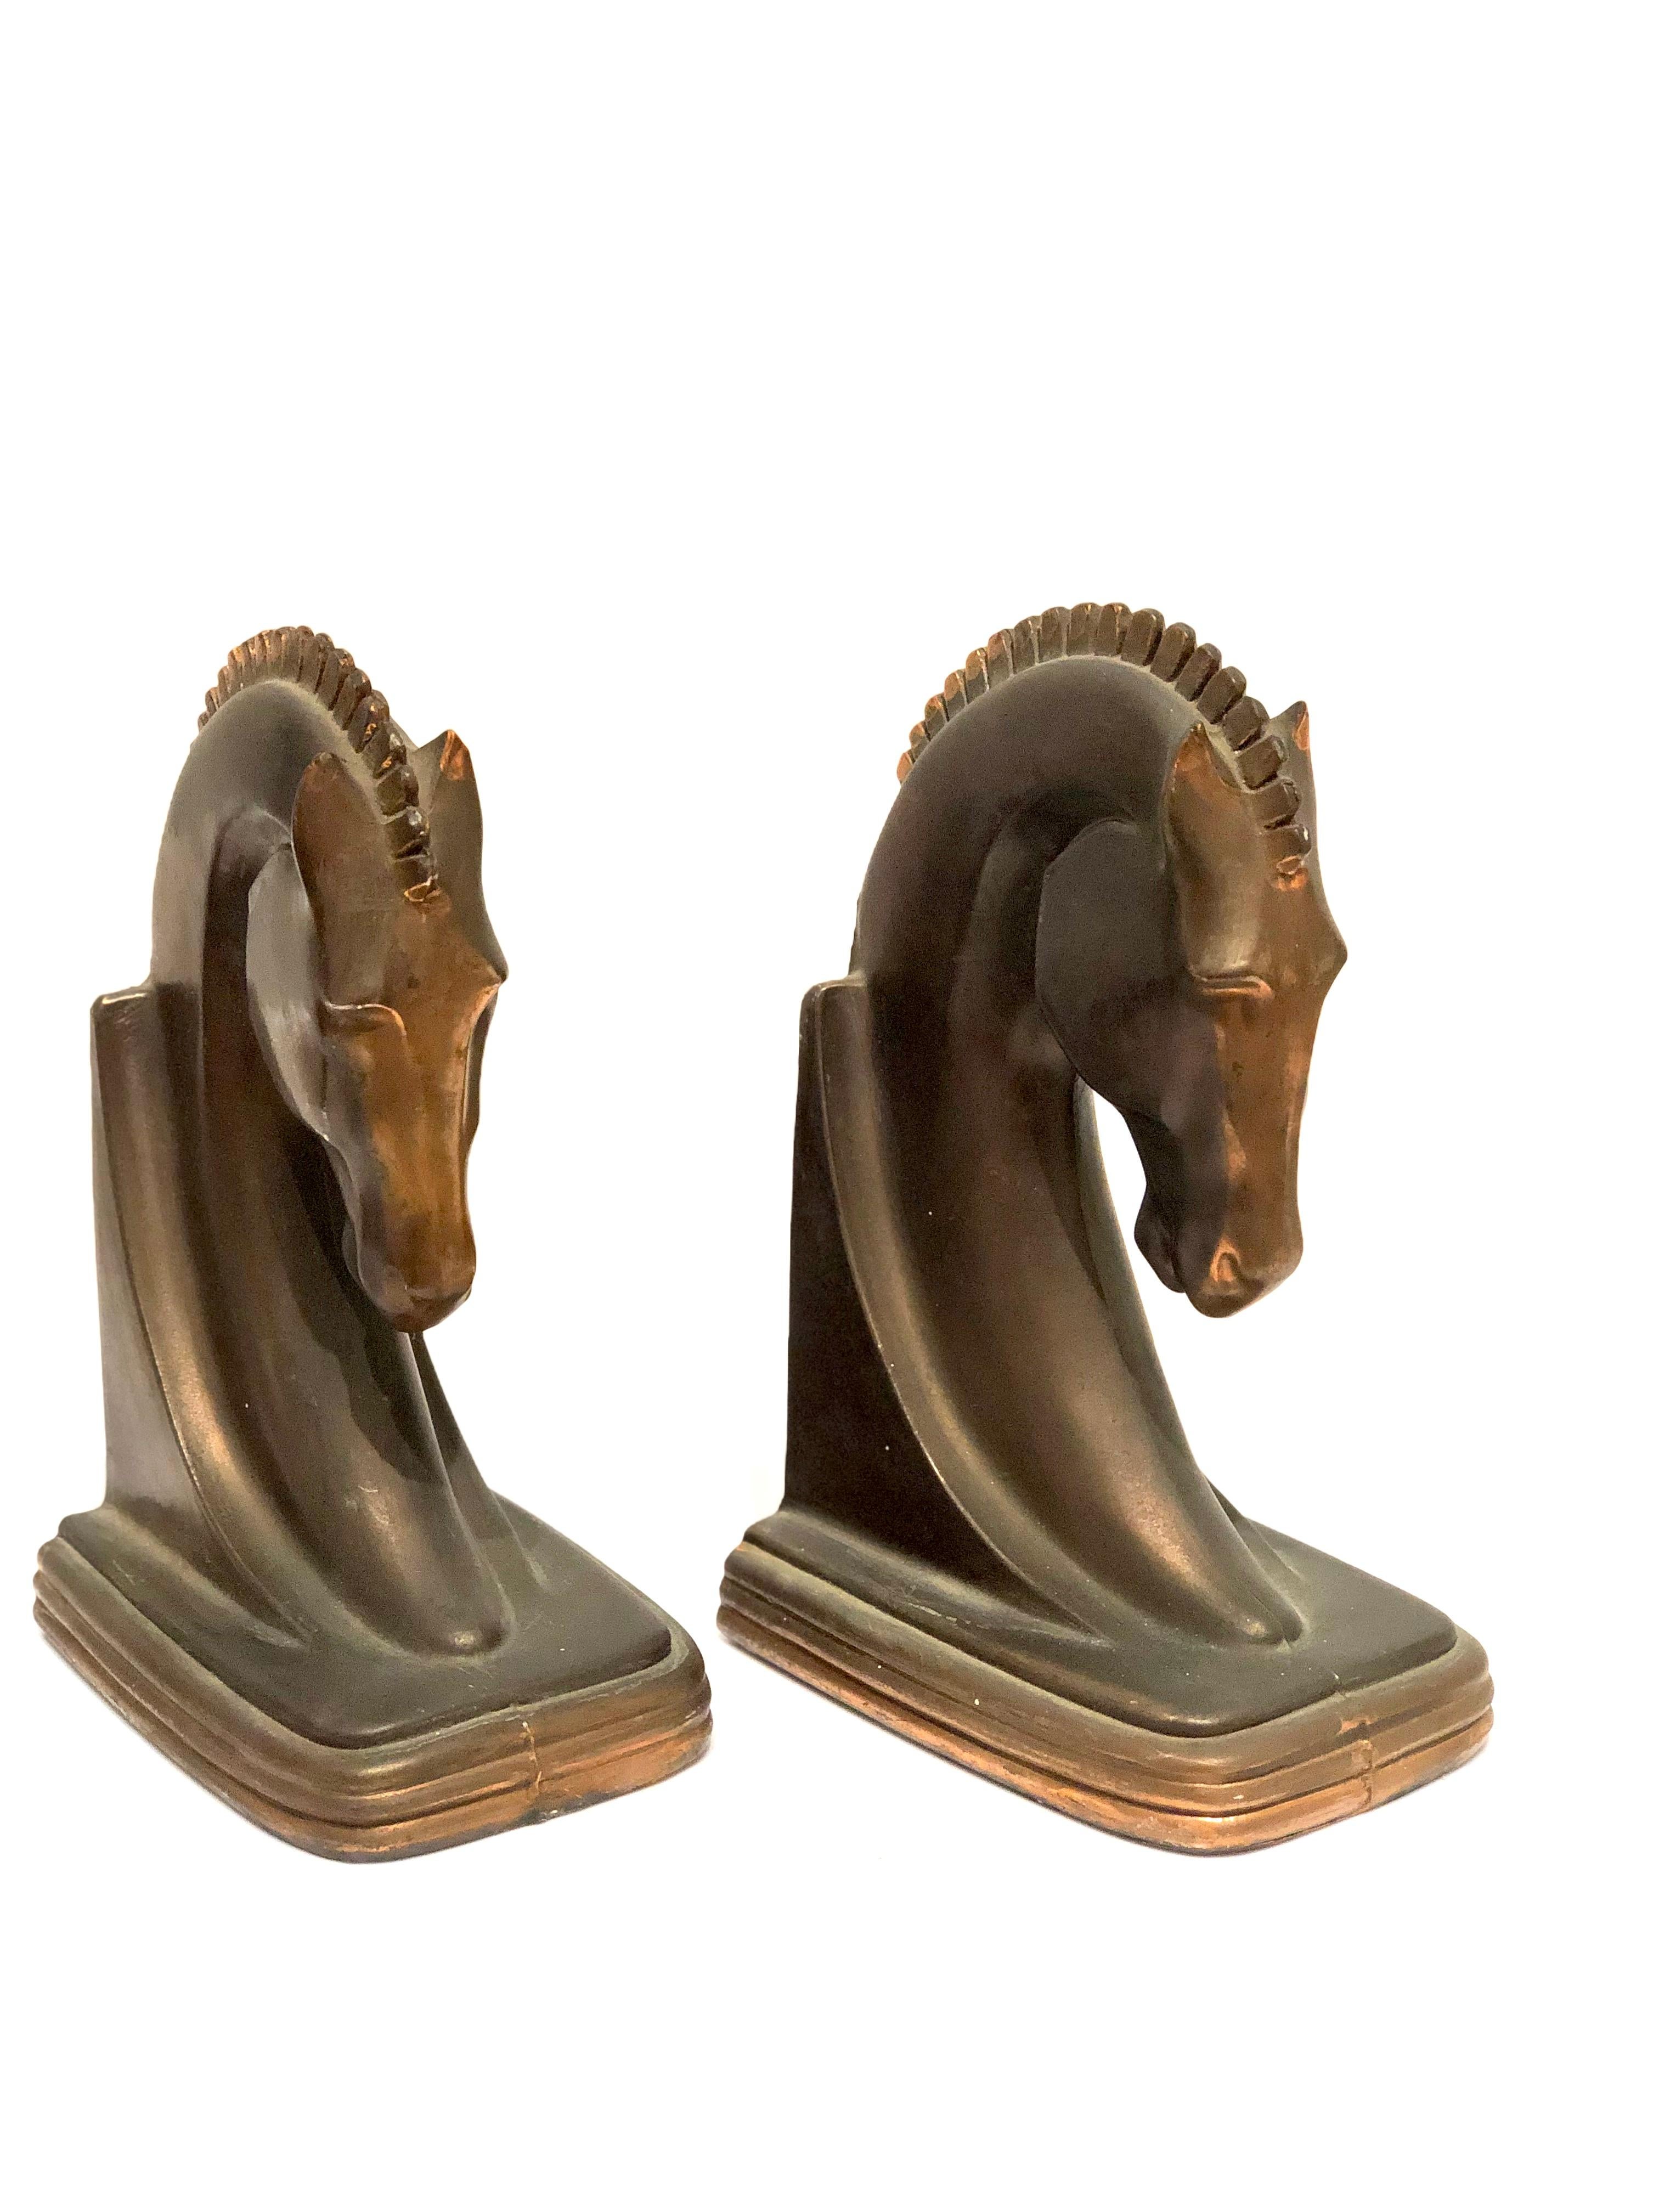 American Art Deco Patinated Bronze Finish Pair of Horse Bookends